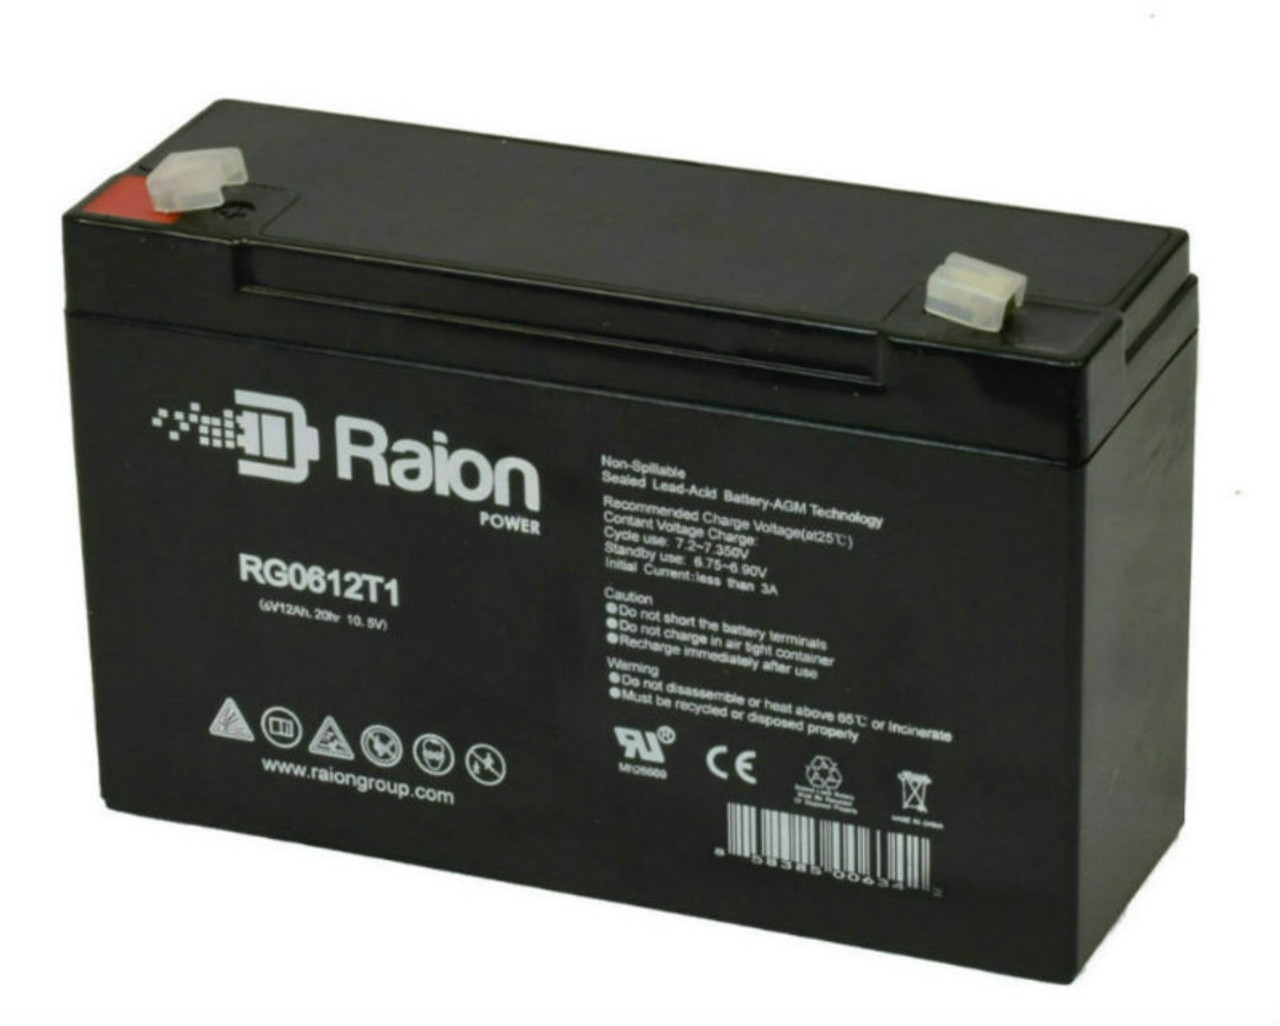 Raion Power RG06120T1 Replacement 6V 12Ah Emergency Light Battery for Light Alarms PS10MP